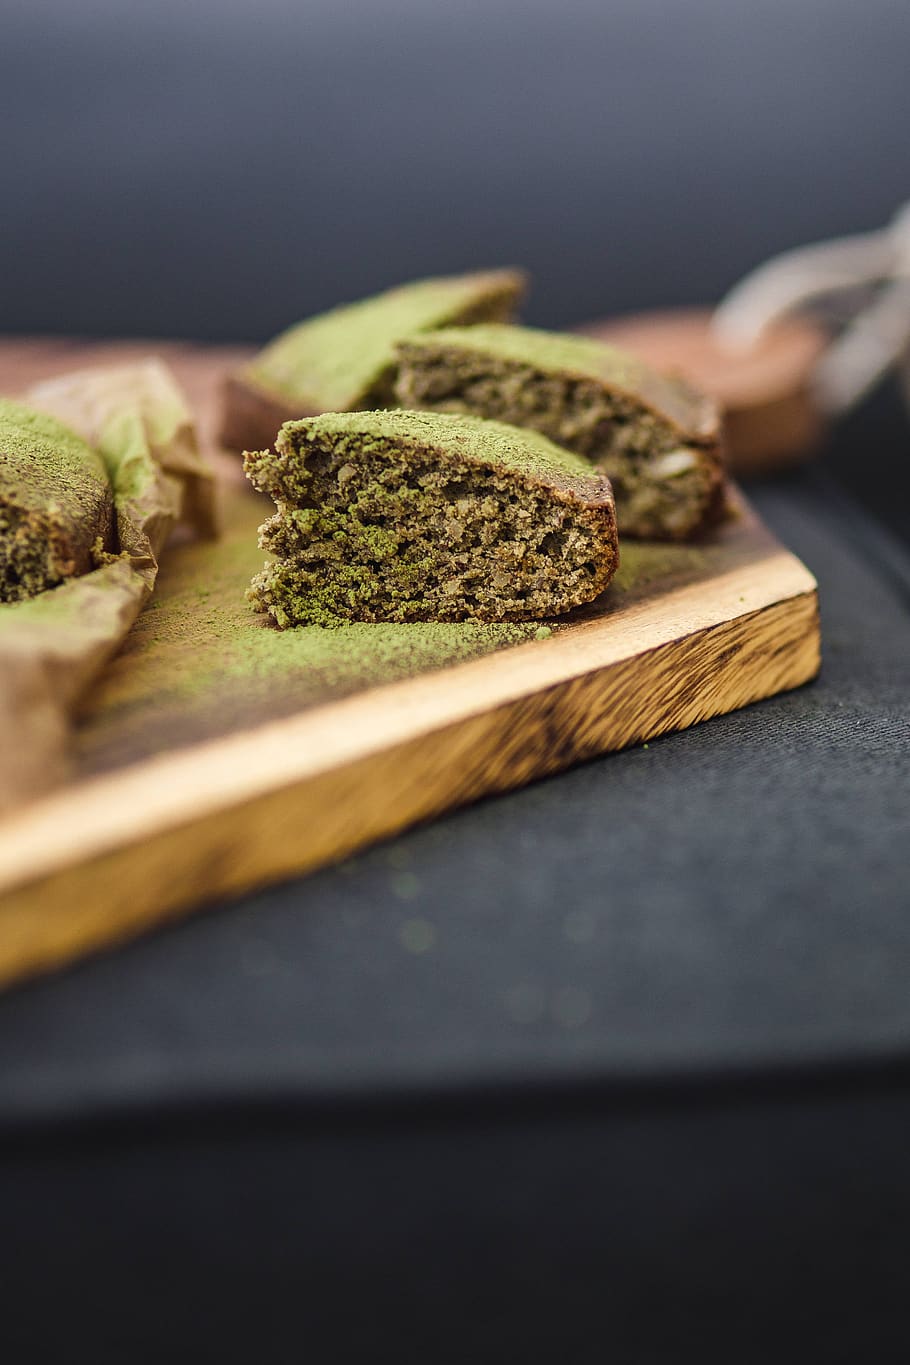 cake, gluten, homemade, wooden, baking, pastry, hygge, board, matcha, Delicious